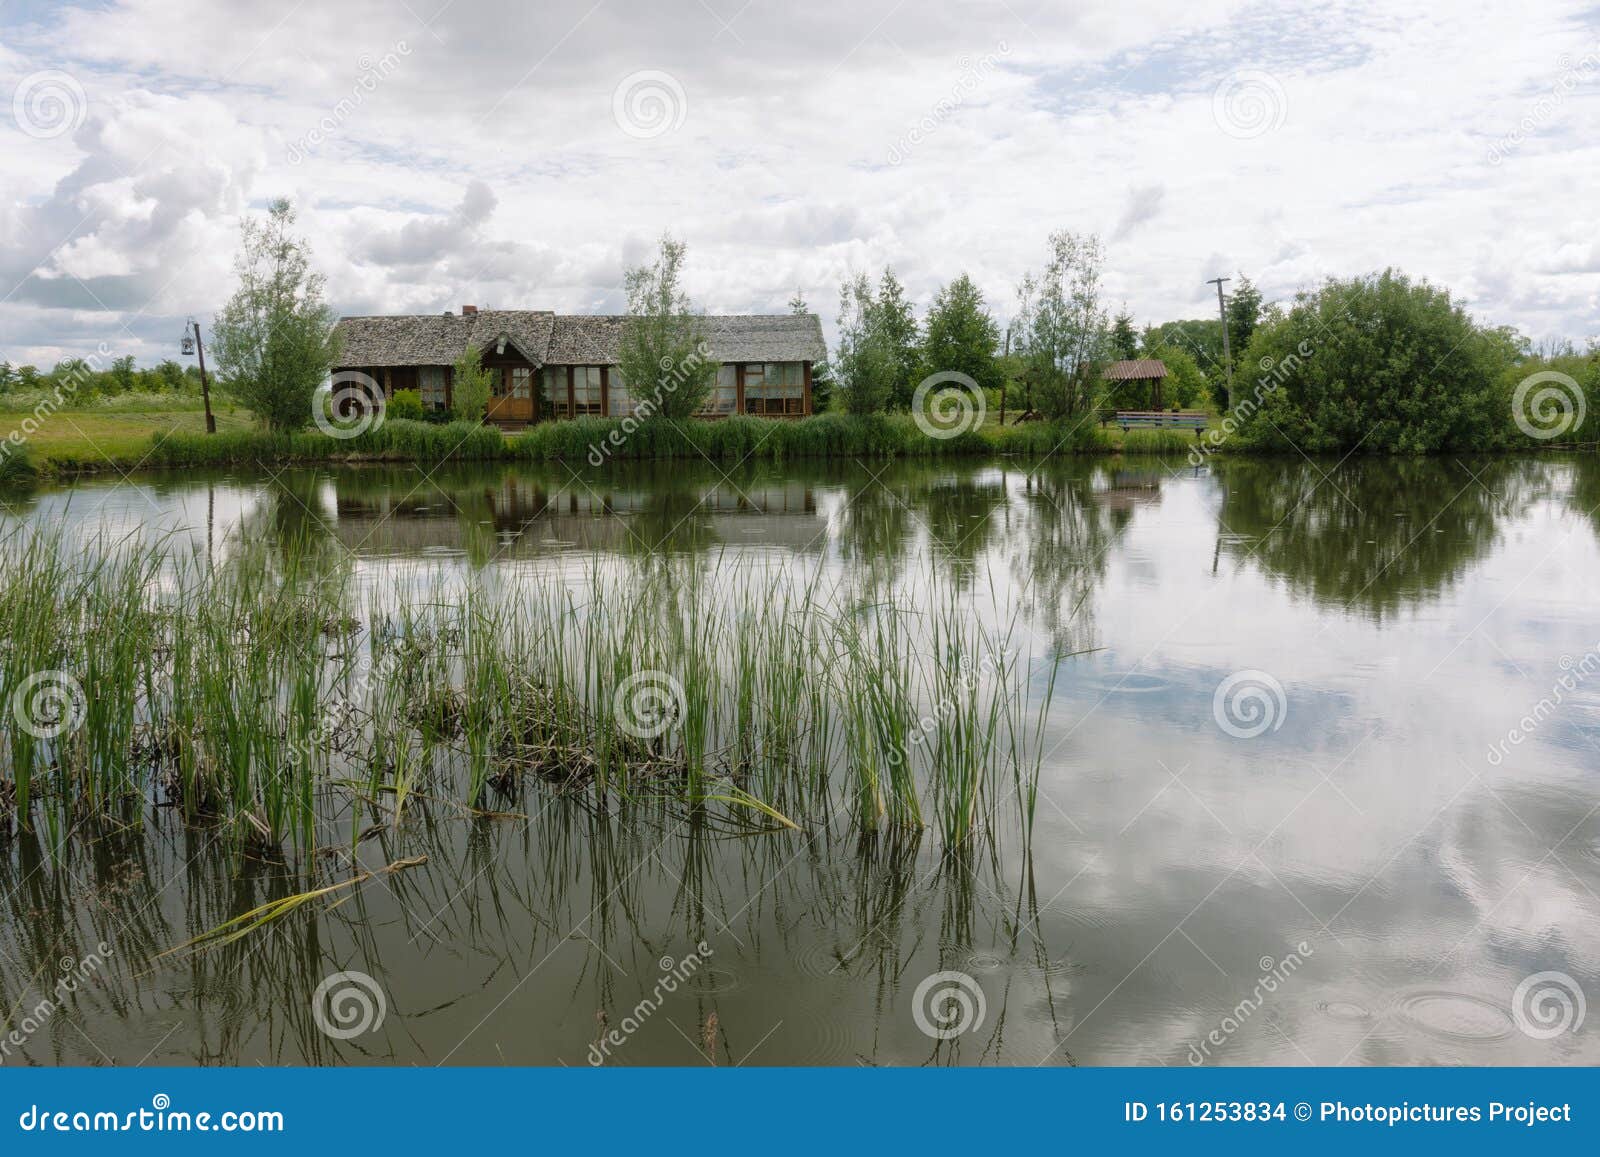 the house by the pond. lake nero. rostov the great